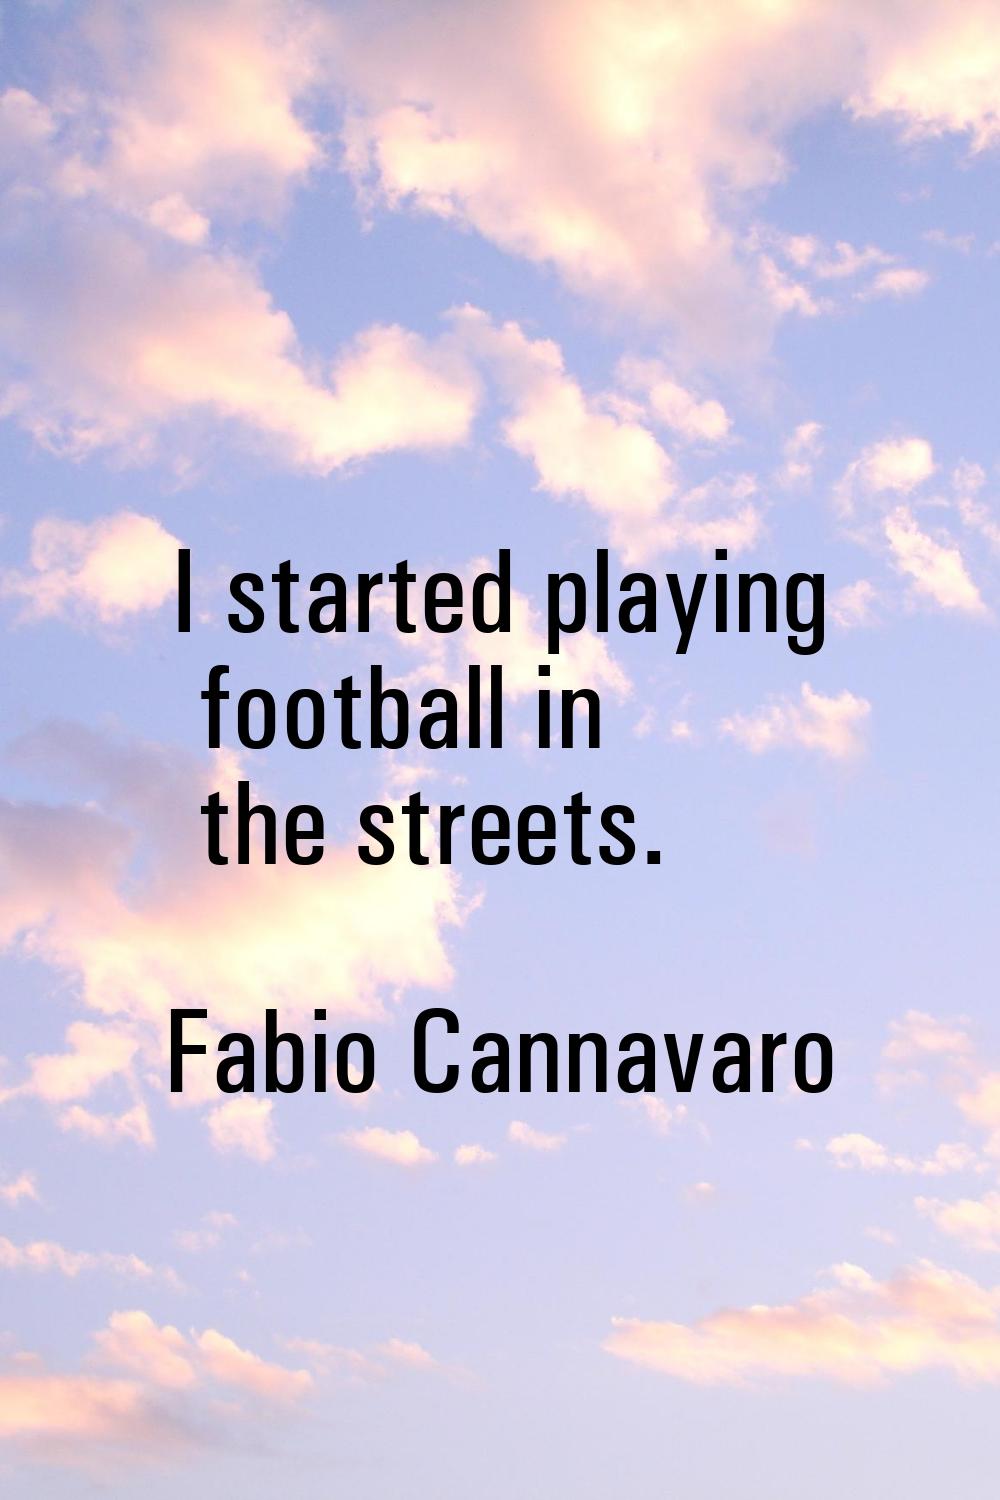 I started playing football in the streets.